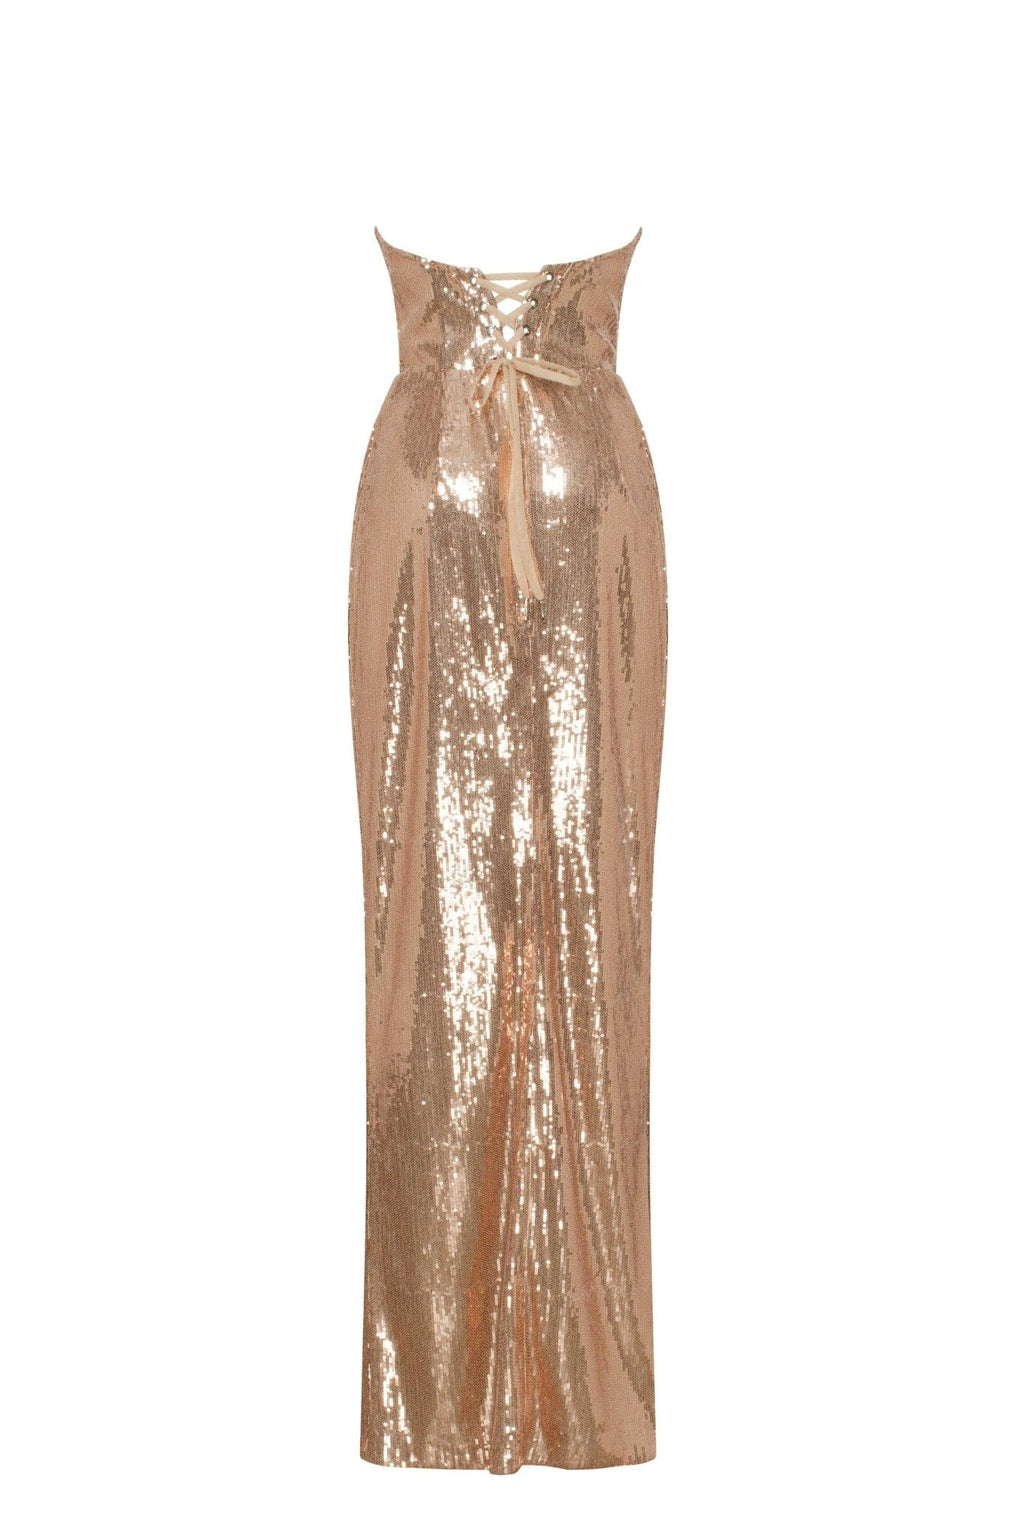 Extravaganza fully sequined gold maxi dress, Smoky Quartz ➤➤ Milla Dresses  - USA, Worldwide delivery